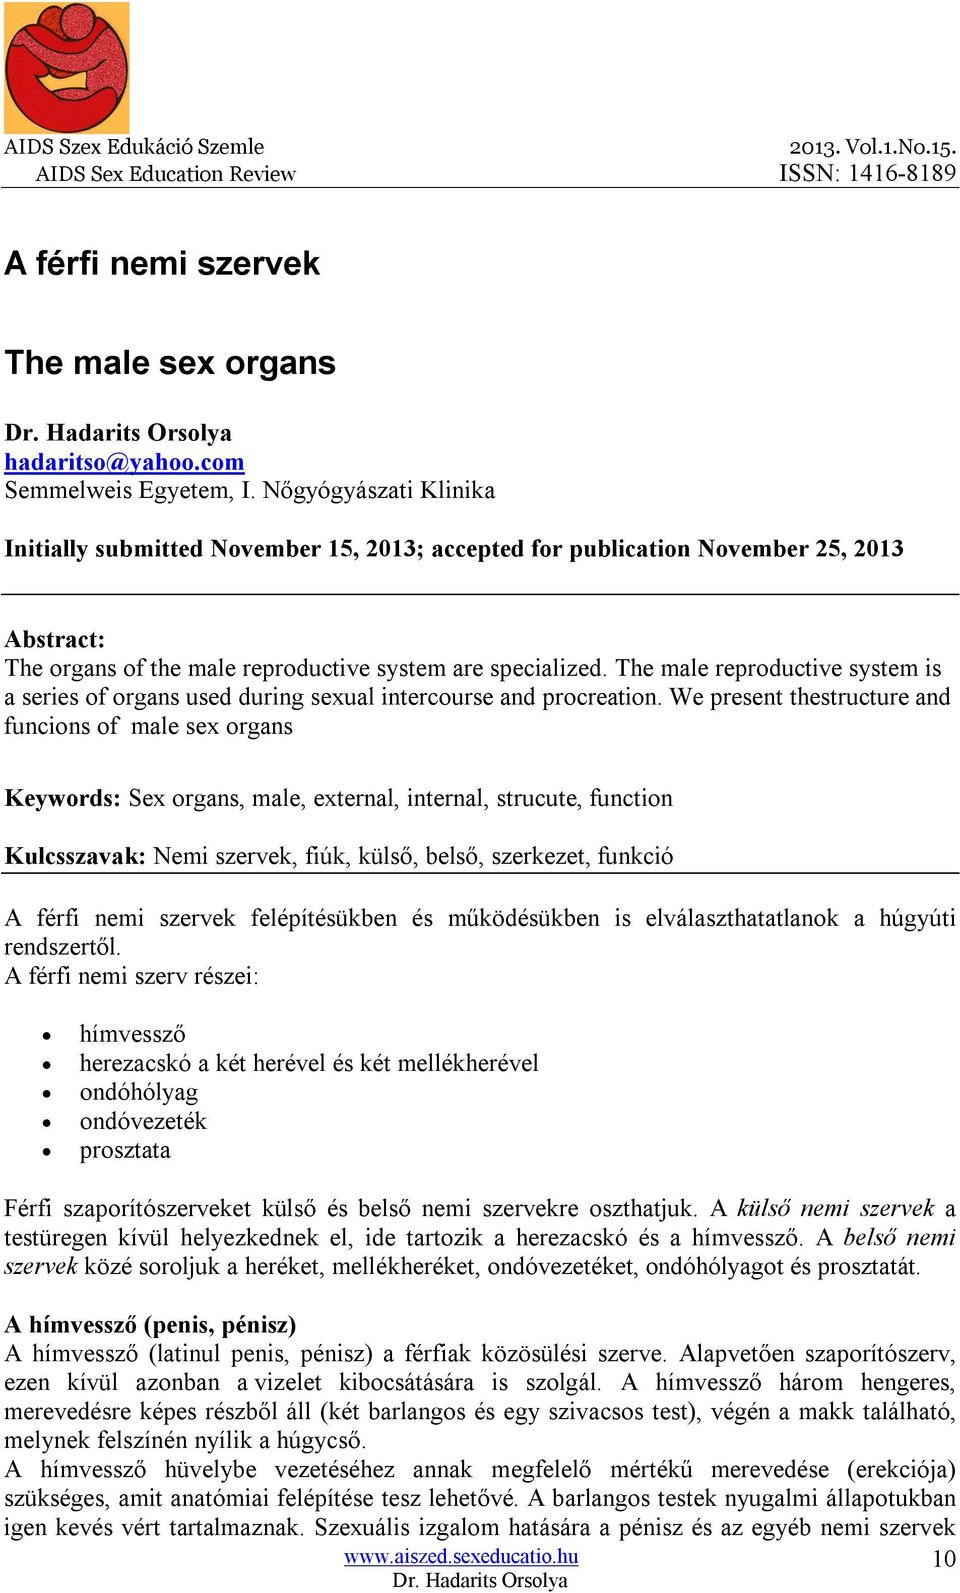 The male reproductive system is a series of organs used during sexual intercourse and procreation.